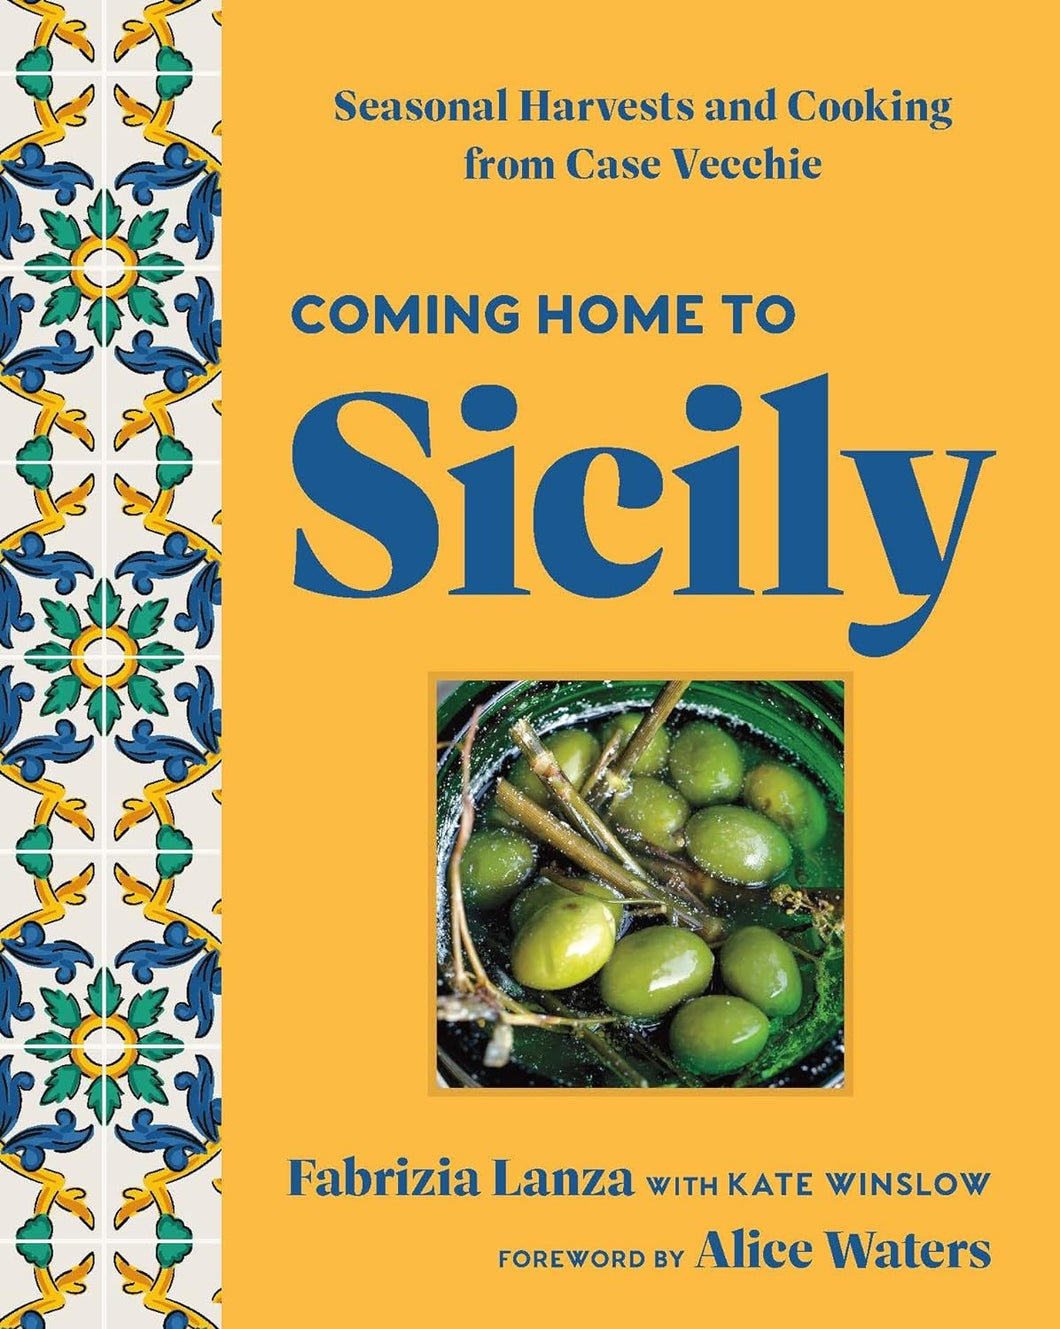 Coming Home to Sicily by Fabrizia Lanza